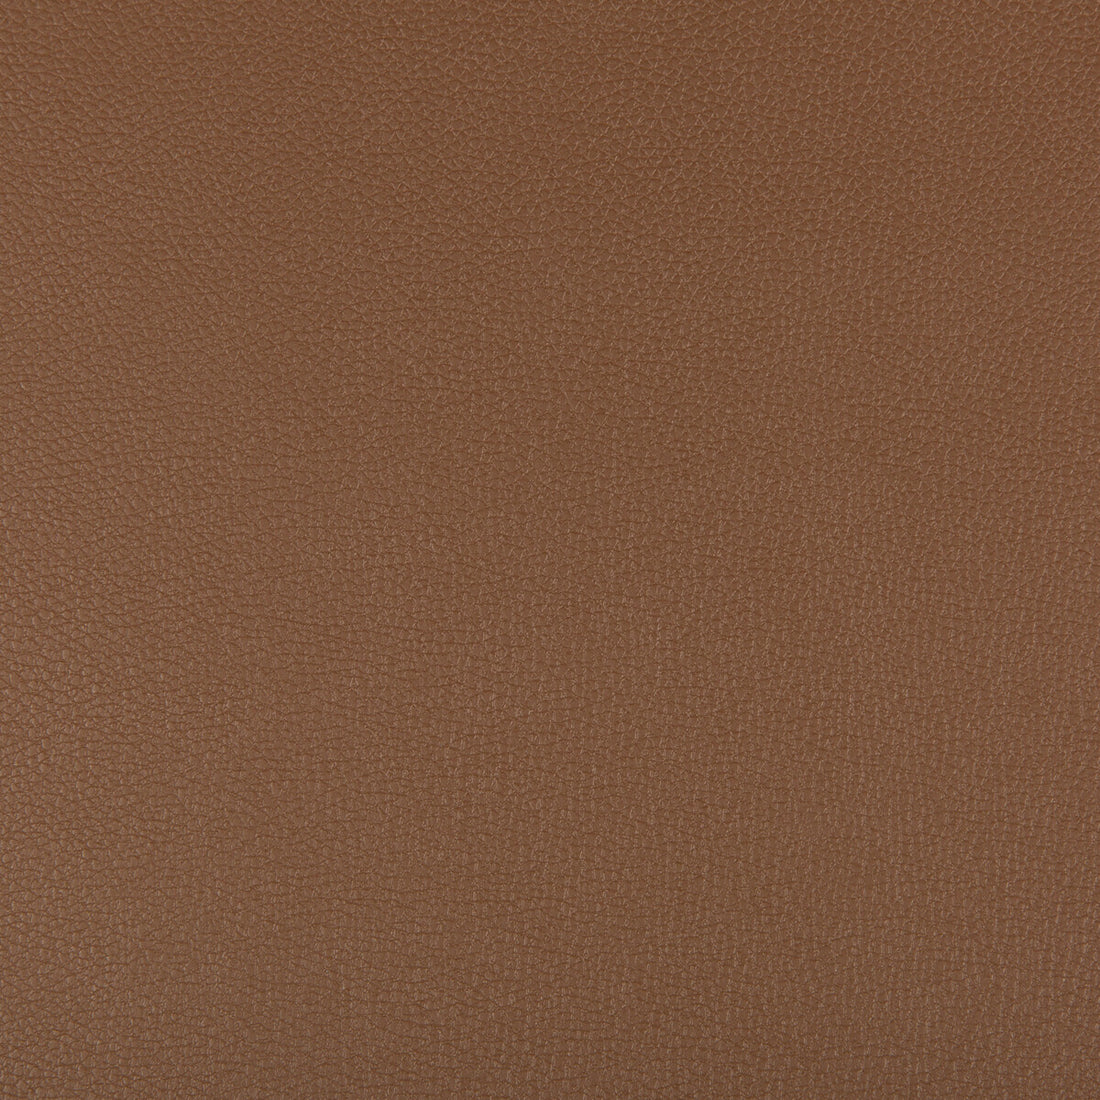 Syrus fabric in brunette color - pattern SYRUS.616.0 - by Kravet Contract